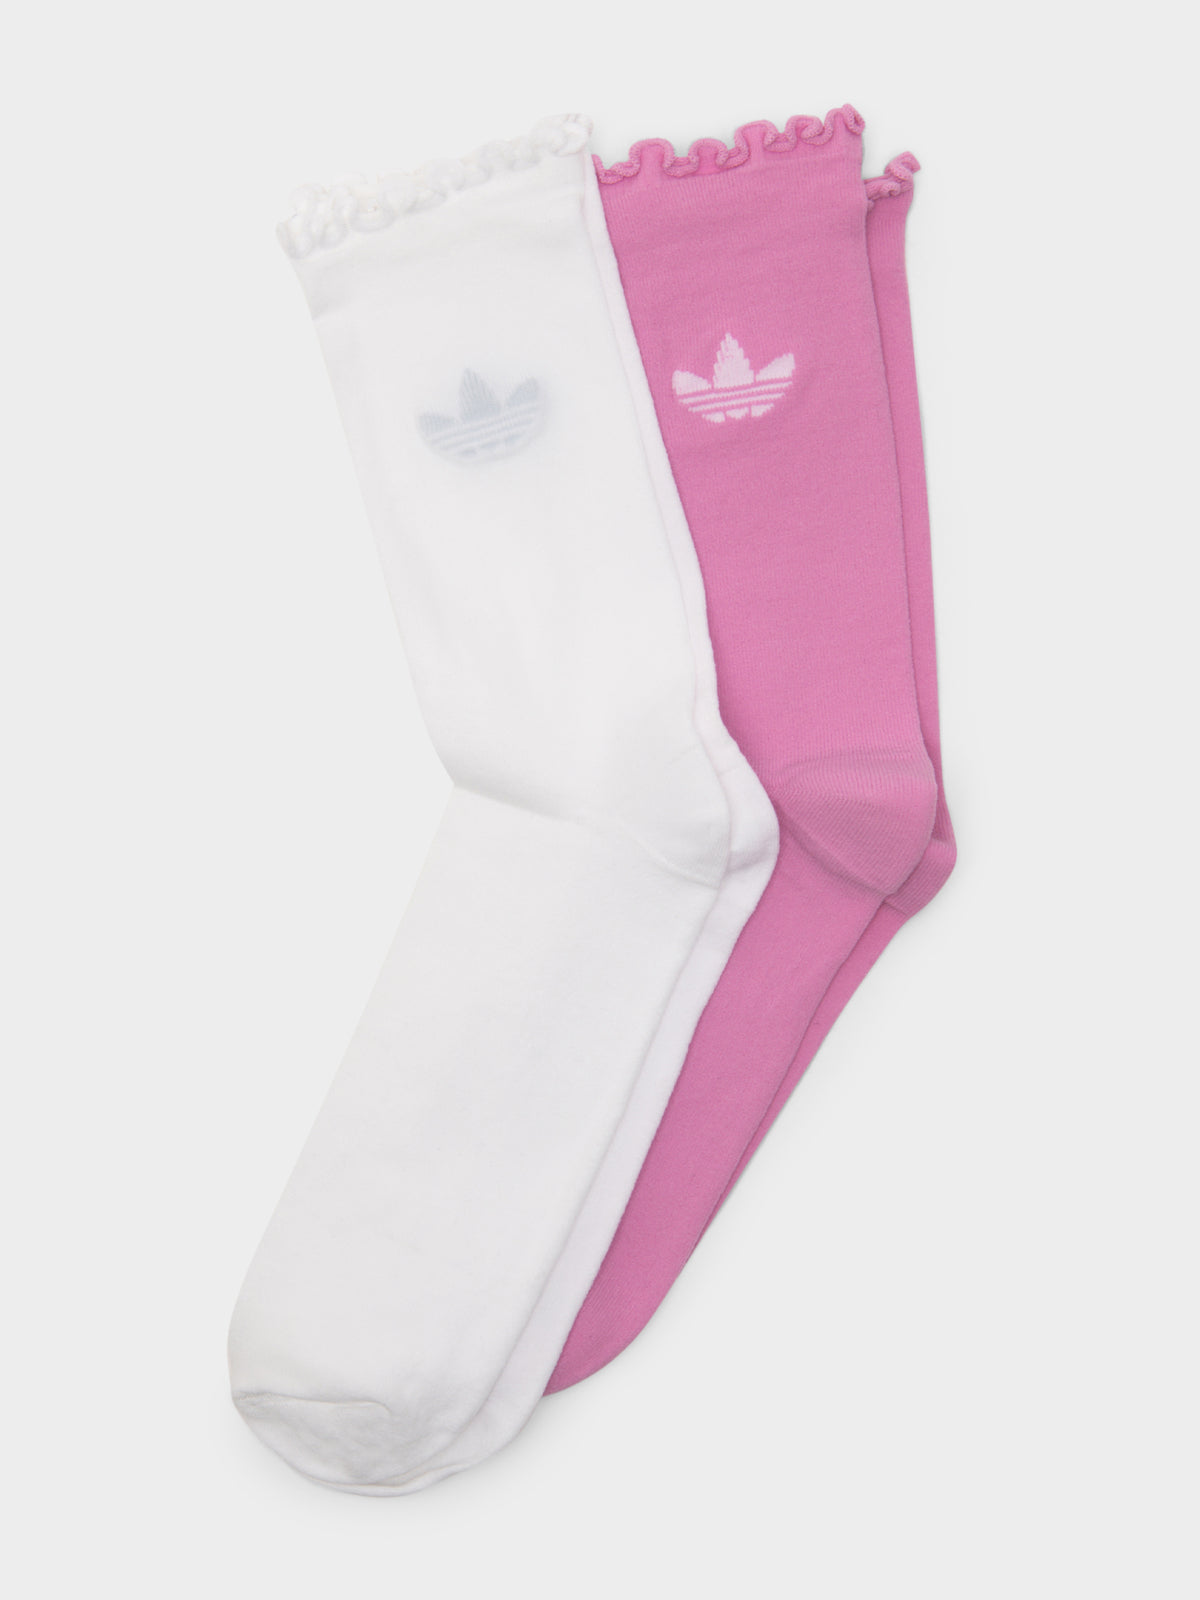 2 Pairs of 2000 Luxe Sheer Frill Socks in White &amp; Bliss Orchid Pink